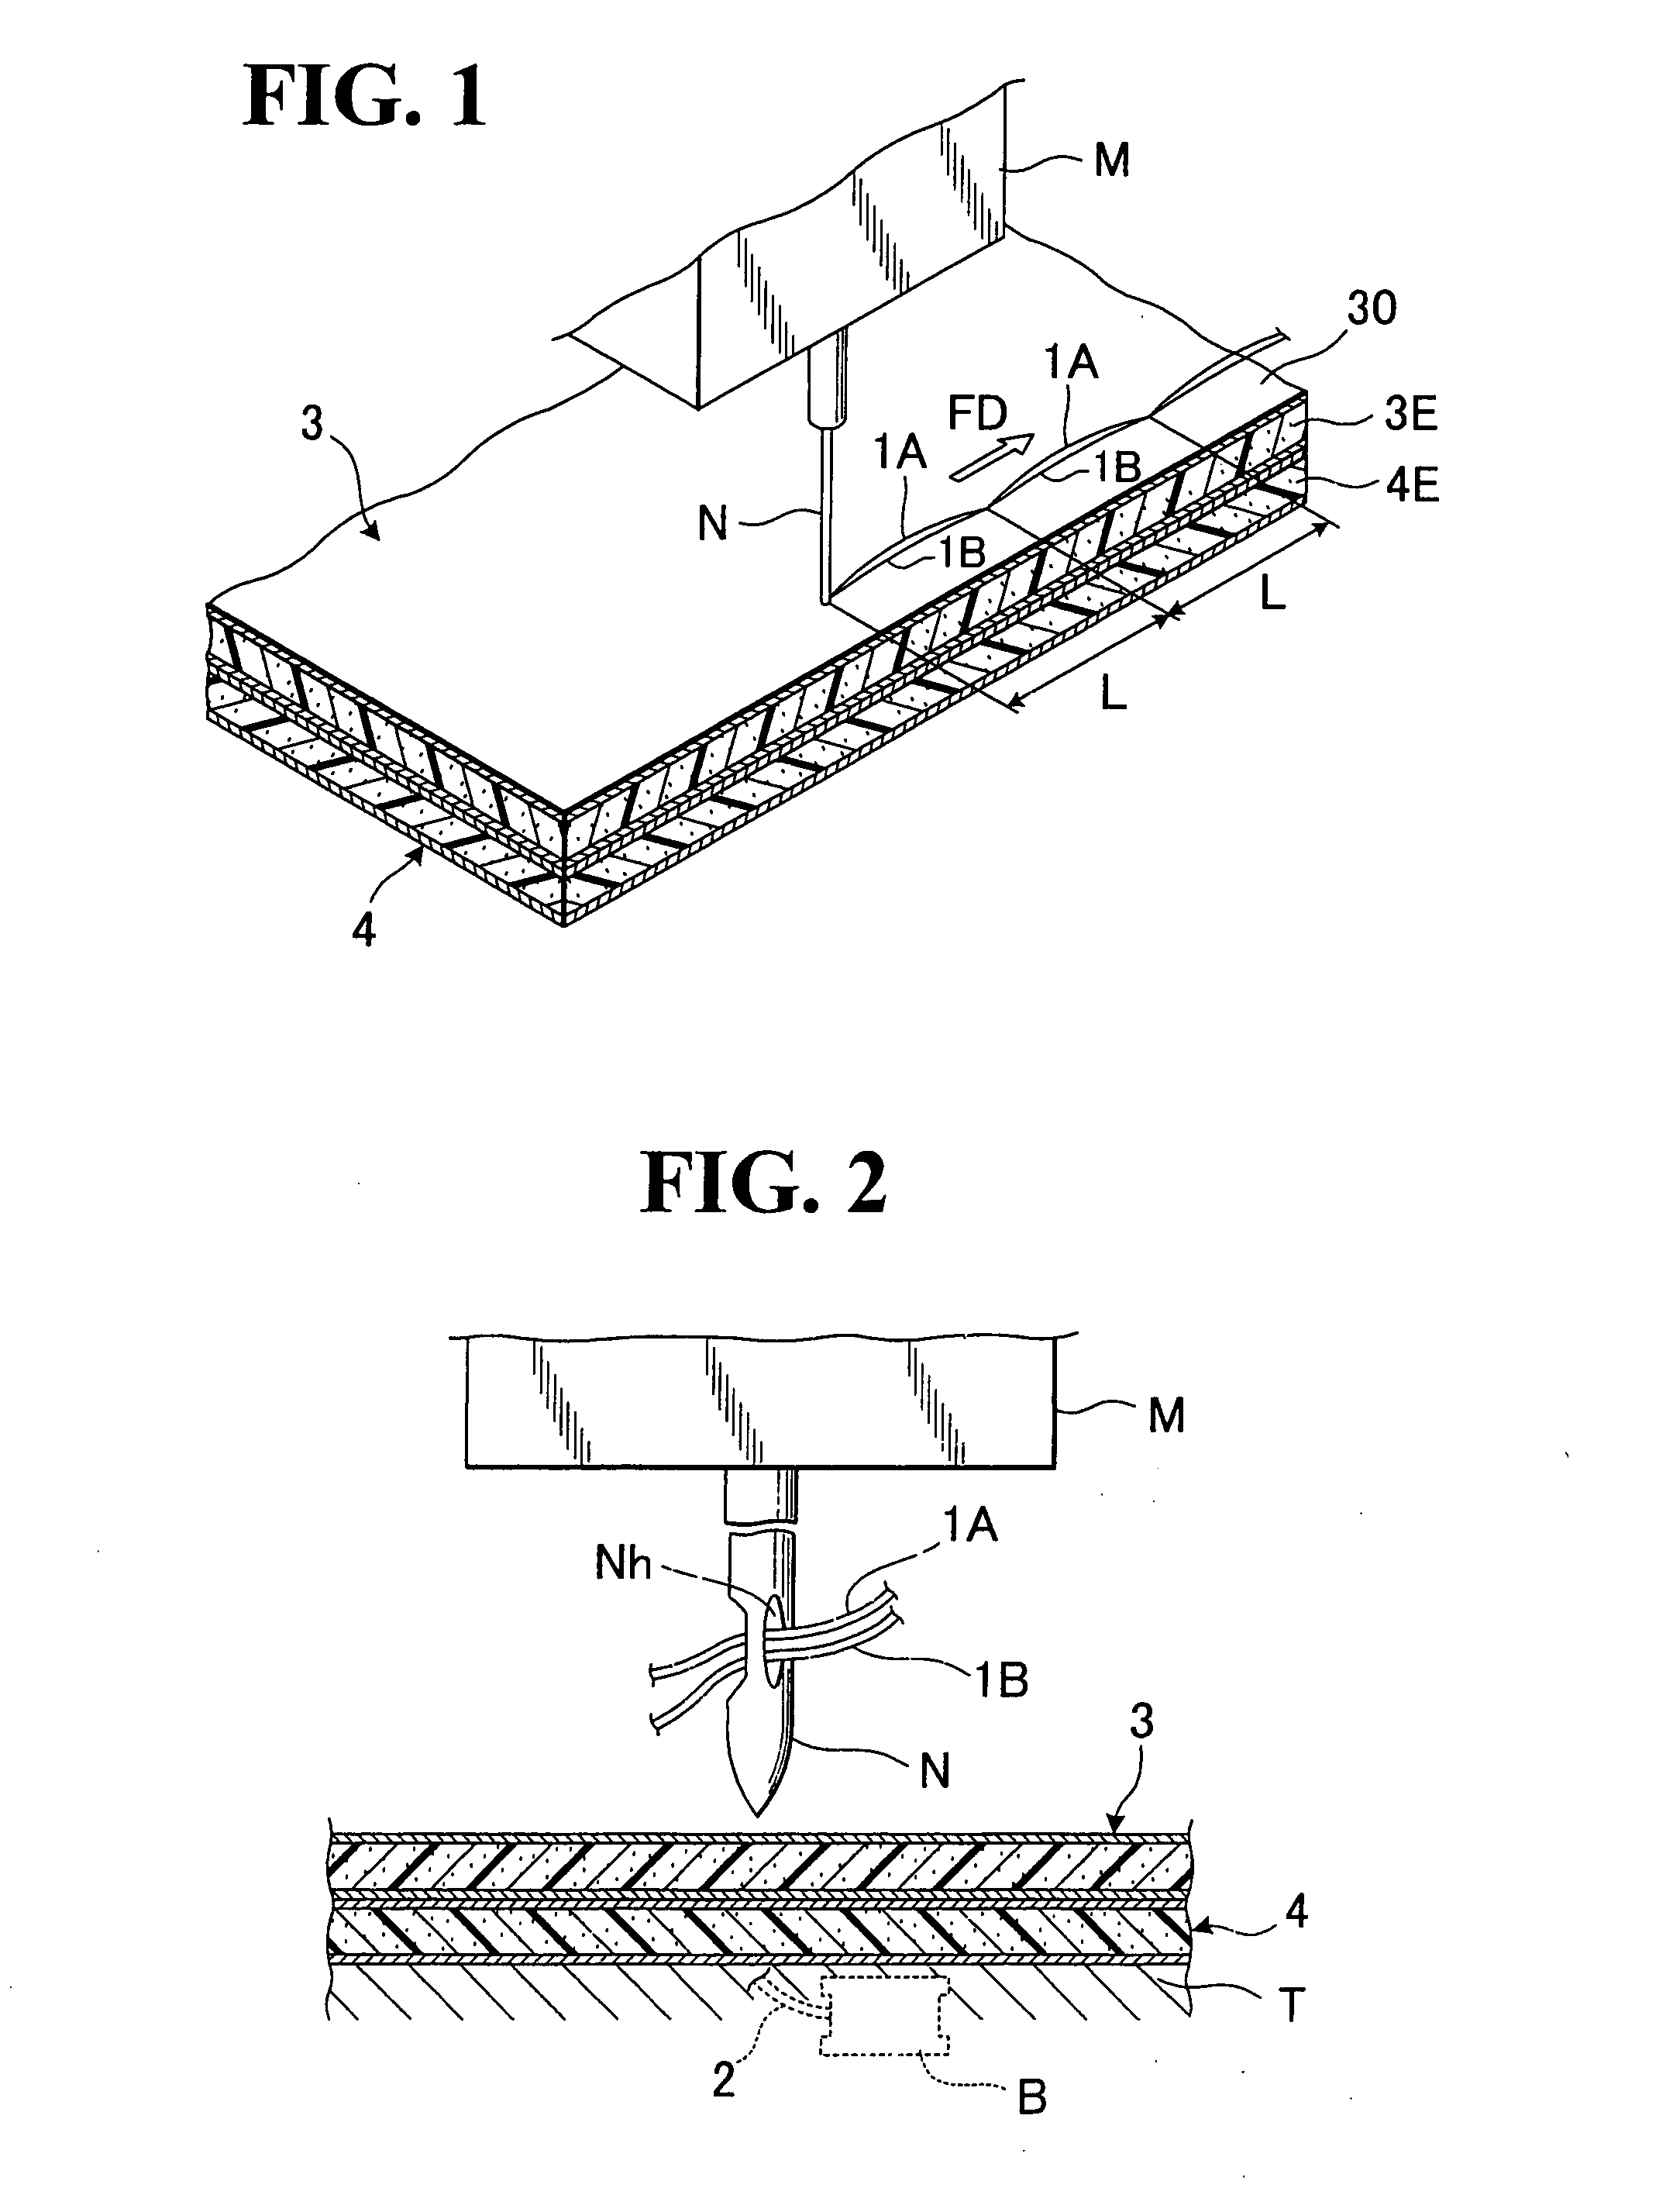 Method for sewing together covering elements adapted to undergo foaming process